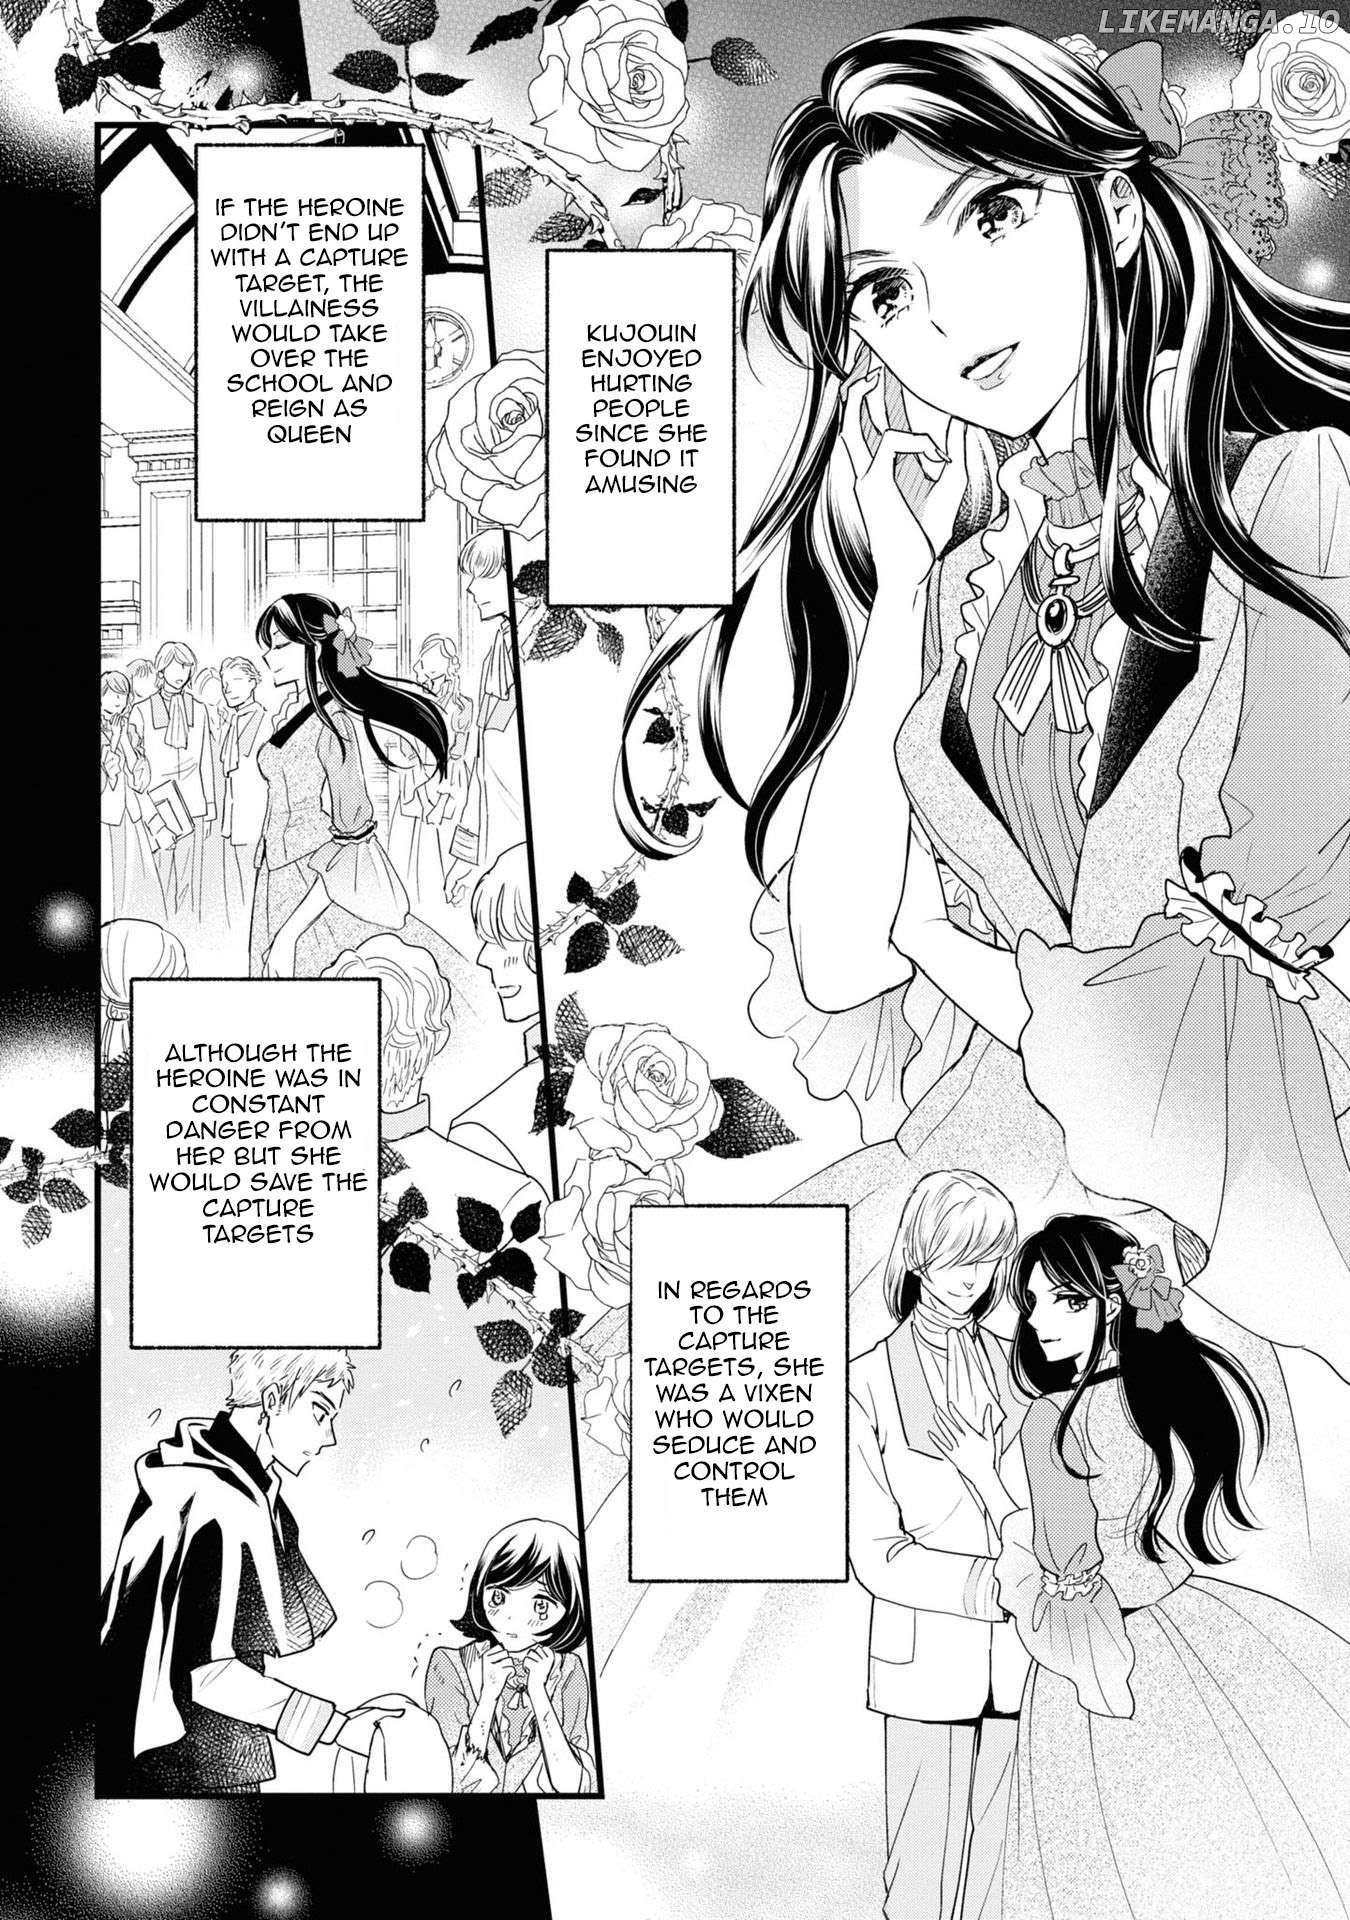 Reiko's Style: Despite Being Mistaken For A Rich Villainess, She's Actually Just Penniless Chapter 7 - page 10